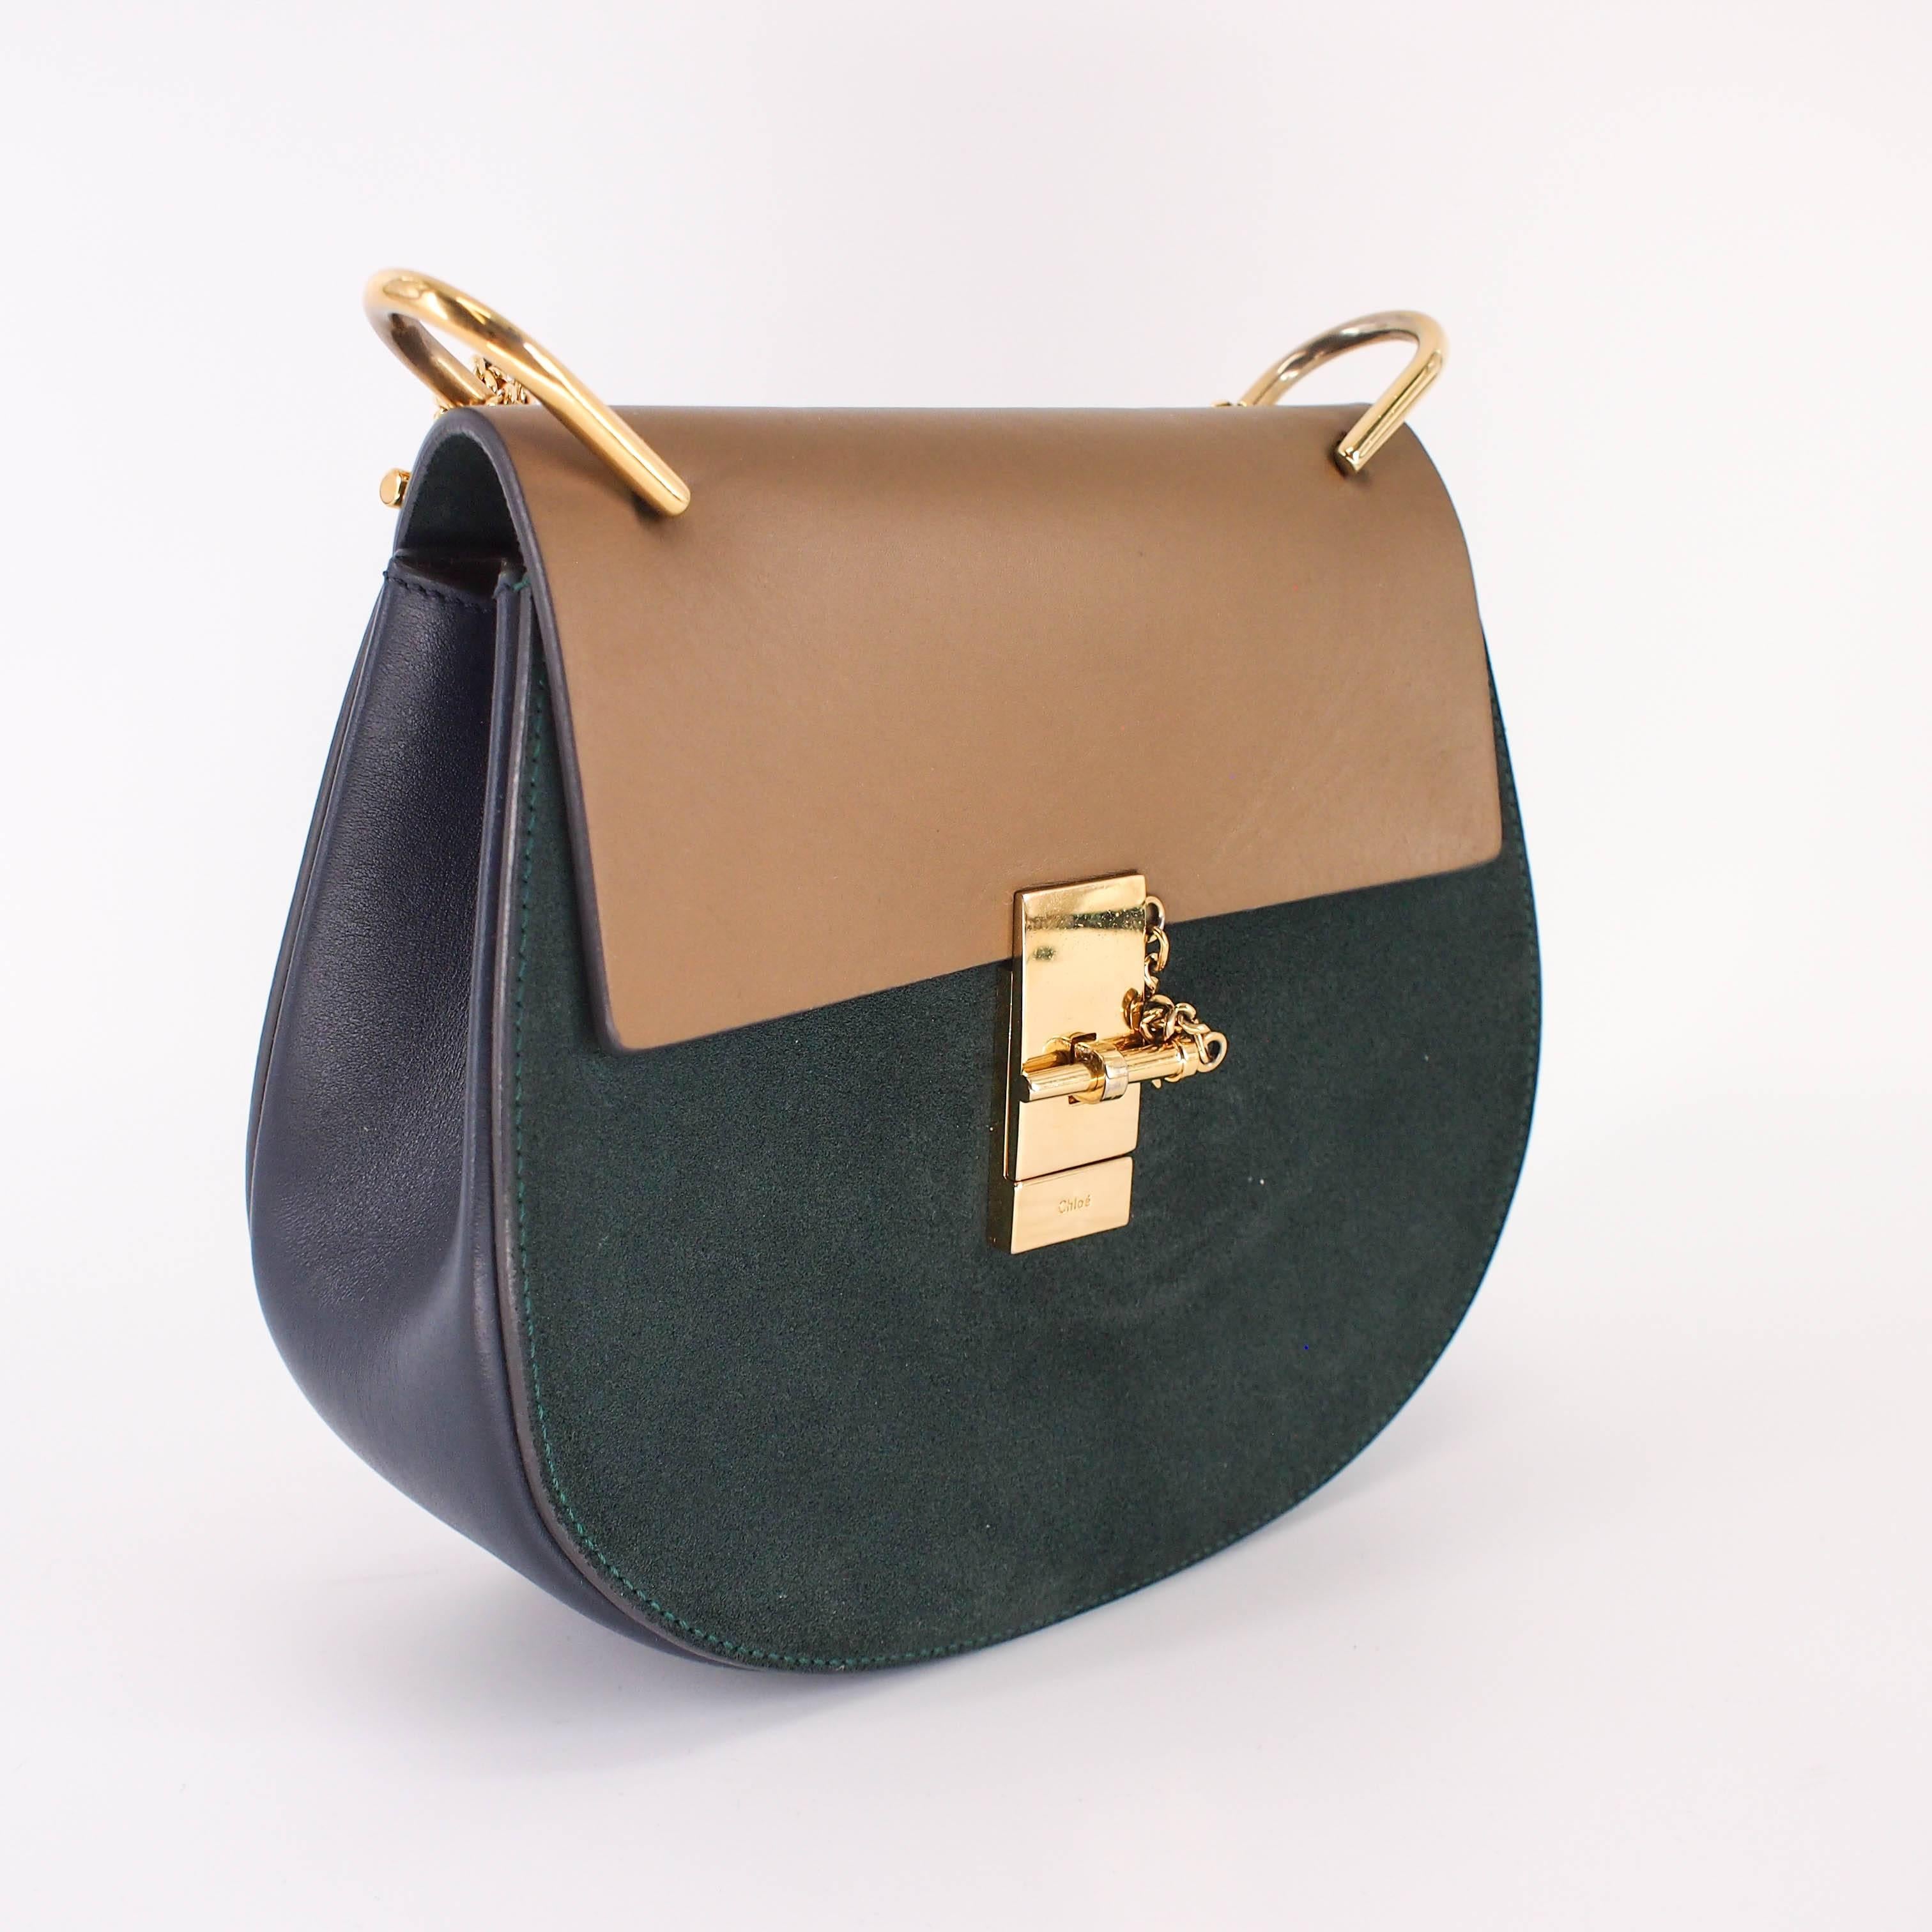 You'll look chic and lovely with this Chloe Shoulder Bag by your side. The gold chain shoulder strap is a beautiful detail with classic navy, forest green, and caramel brown colors of the exterior. The interior features one flap pocket for anything